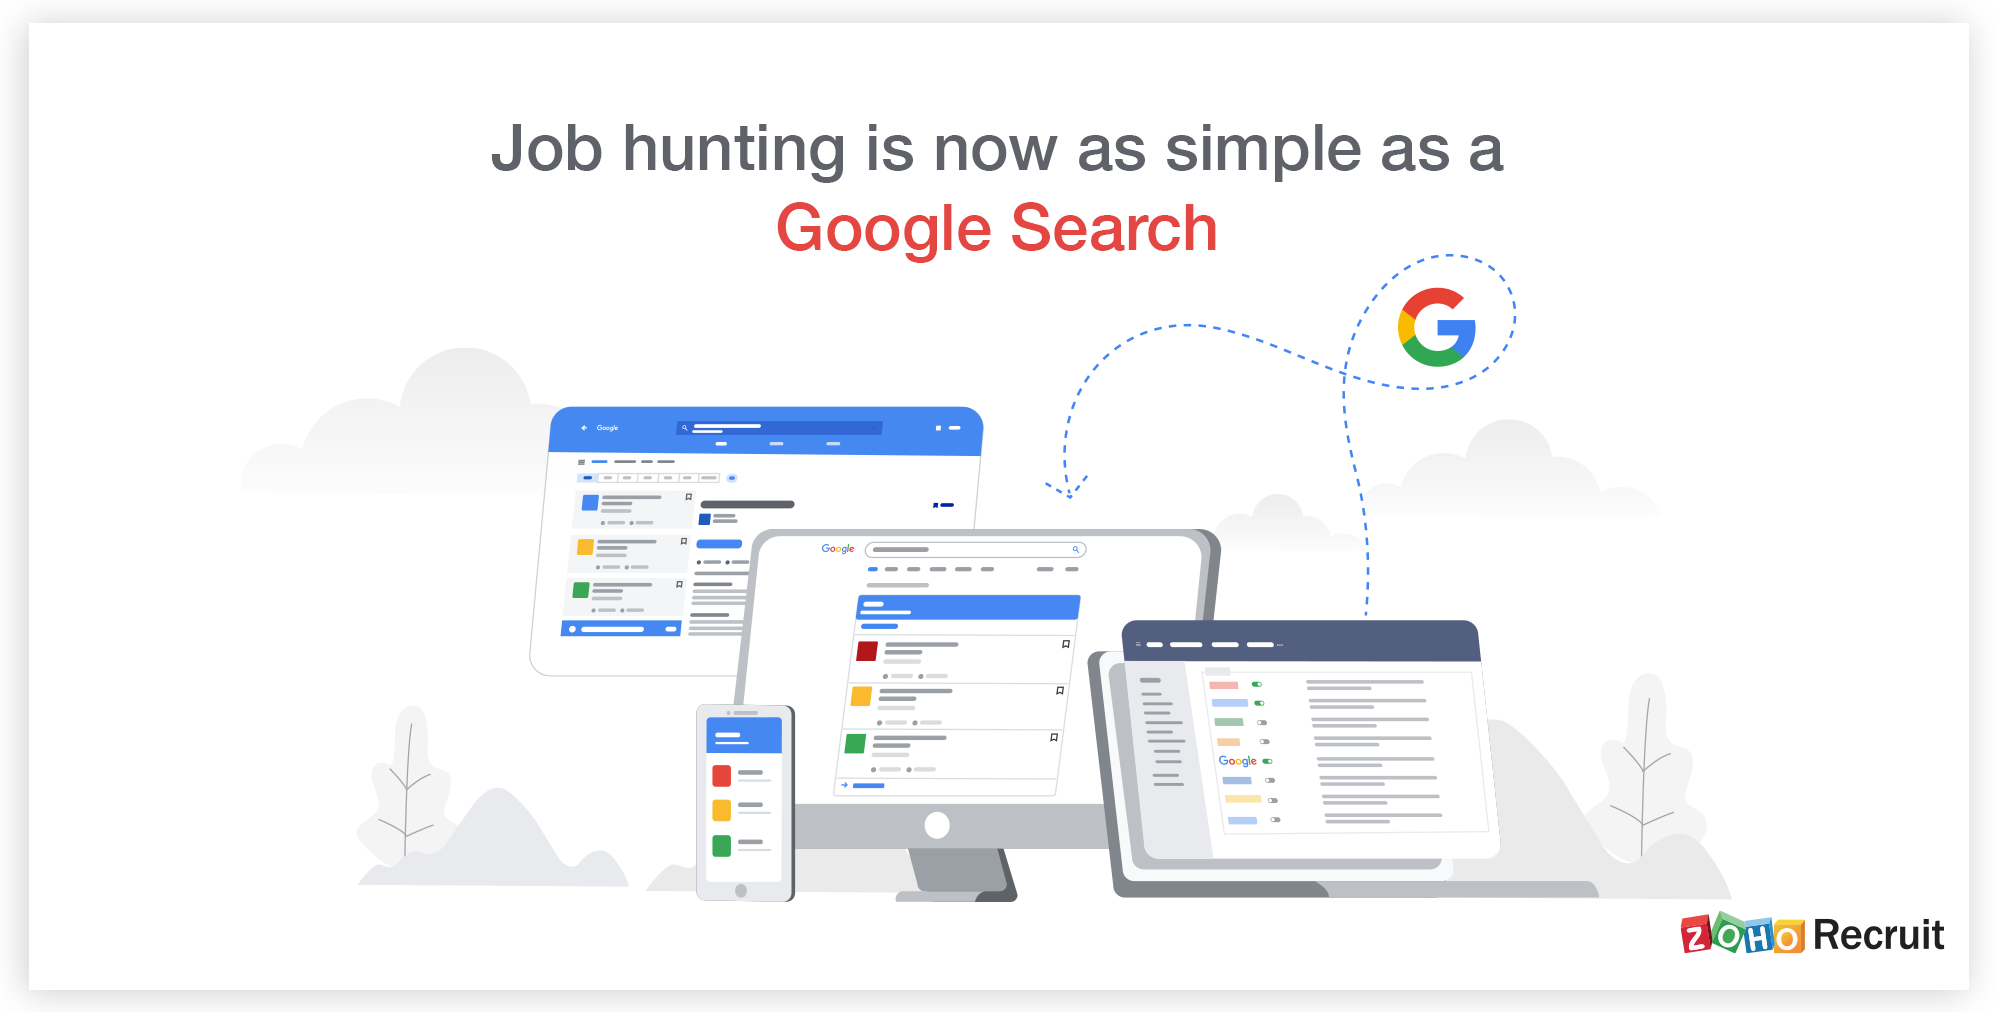 Get your jobs to the top of Google Search with Zoho Recruit